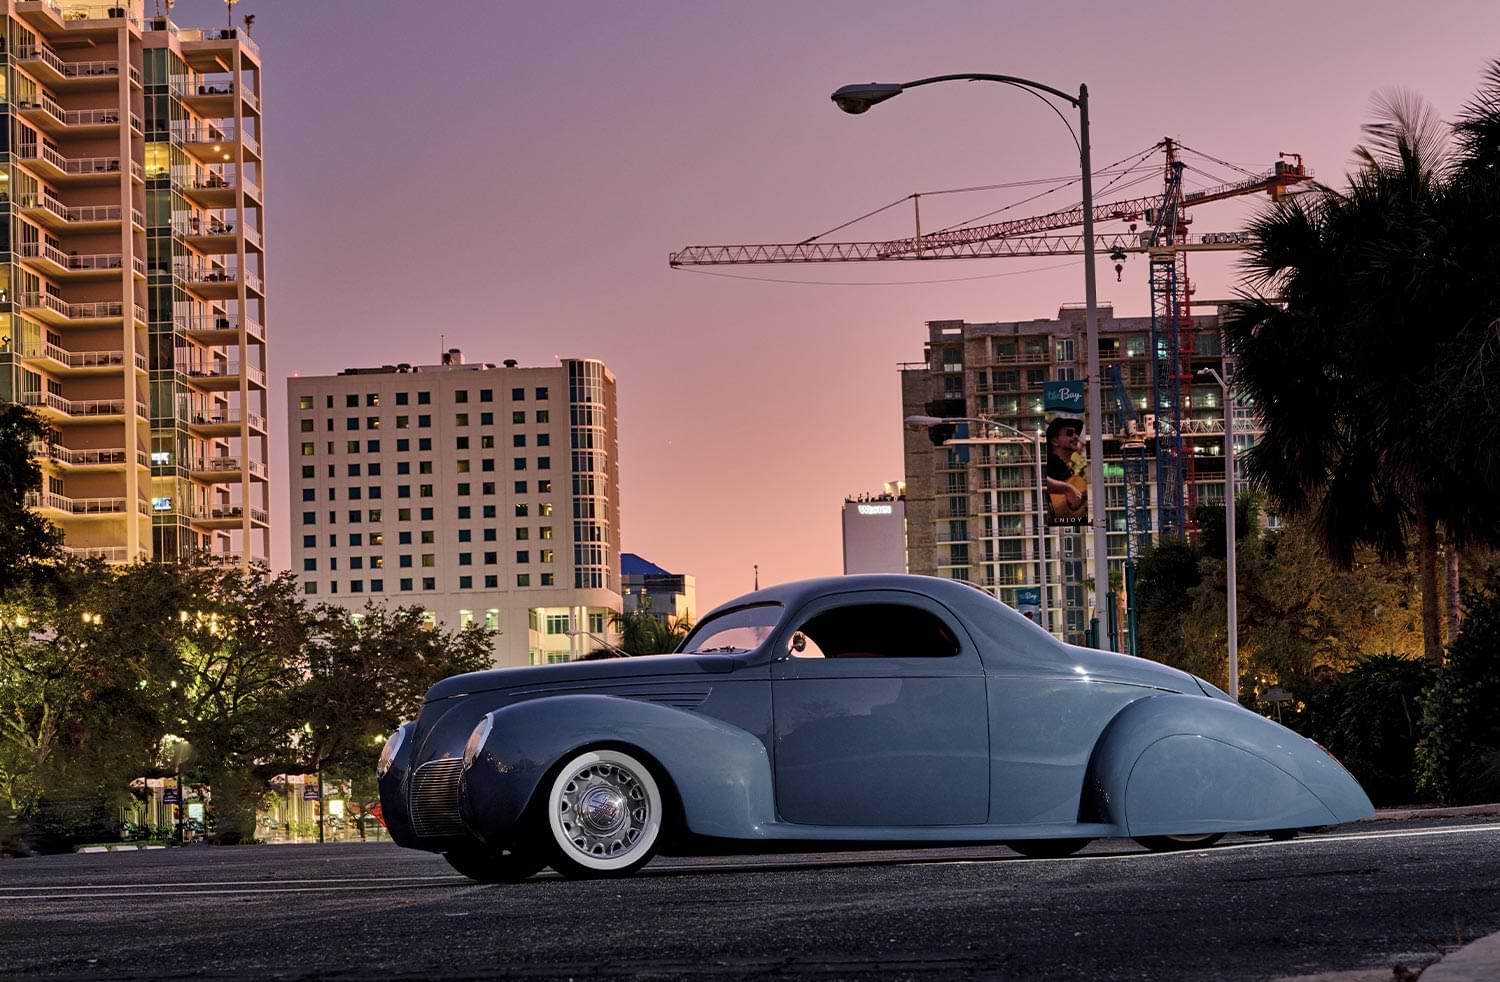 driver side profile of the custom ’38 Lincoln Zephyr parked against a city cityscape at dusk